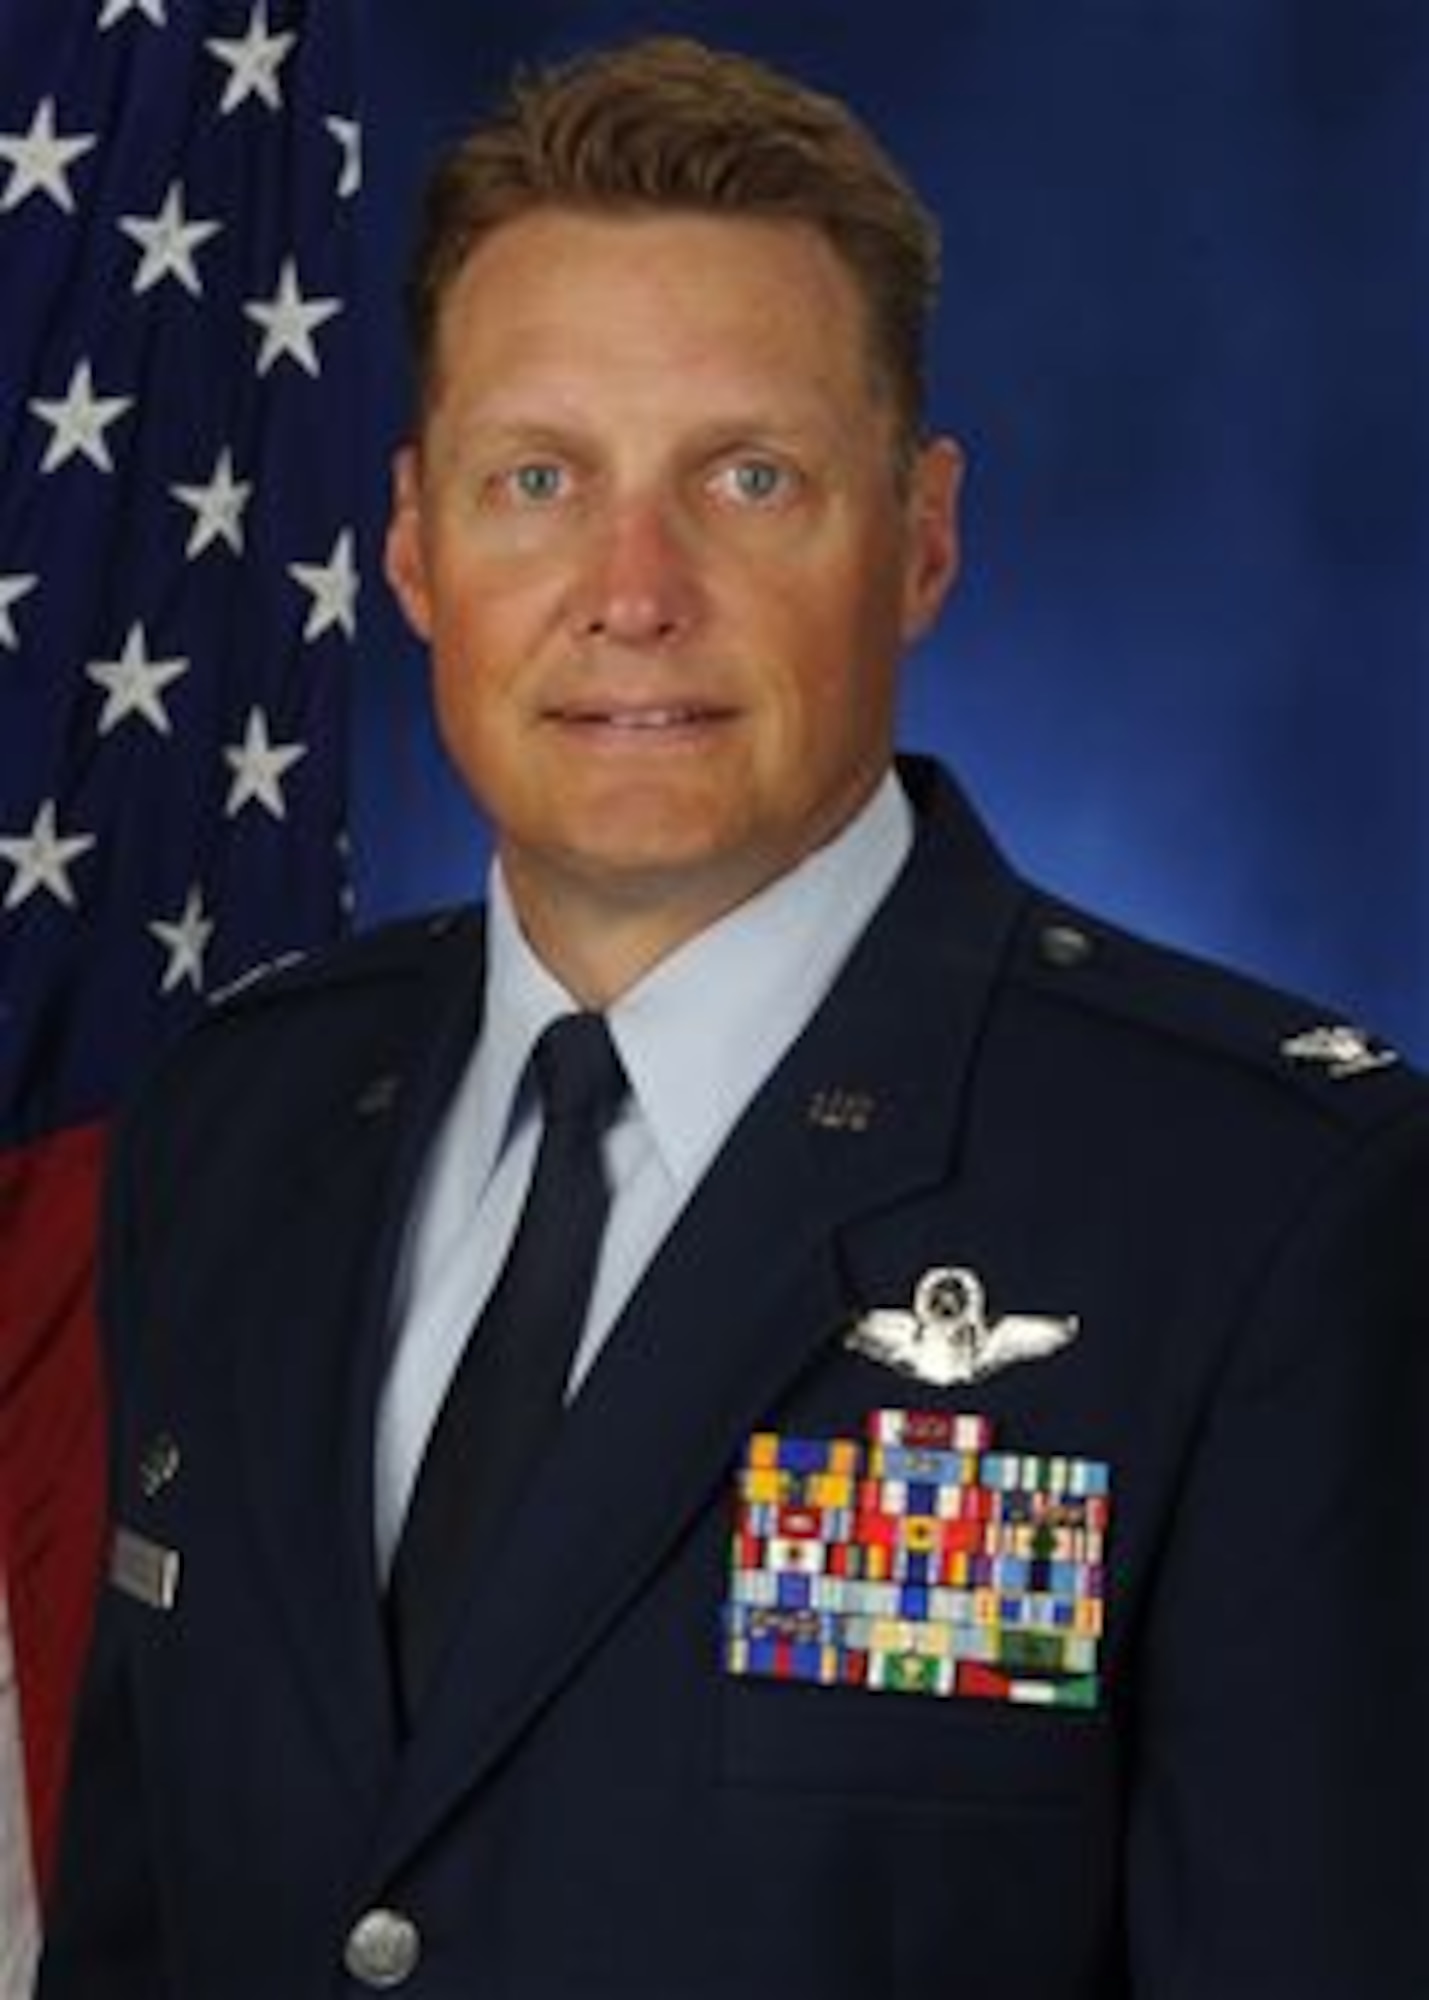 JOINT BASE ELMENDORF-RICHARDSON, Alaska -- Official photo of Col. Blake Gettys, commander of the 176th Wing as of October 2014